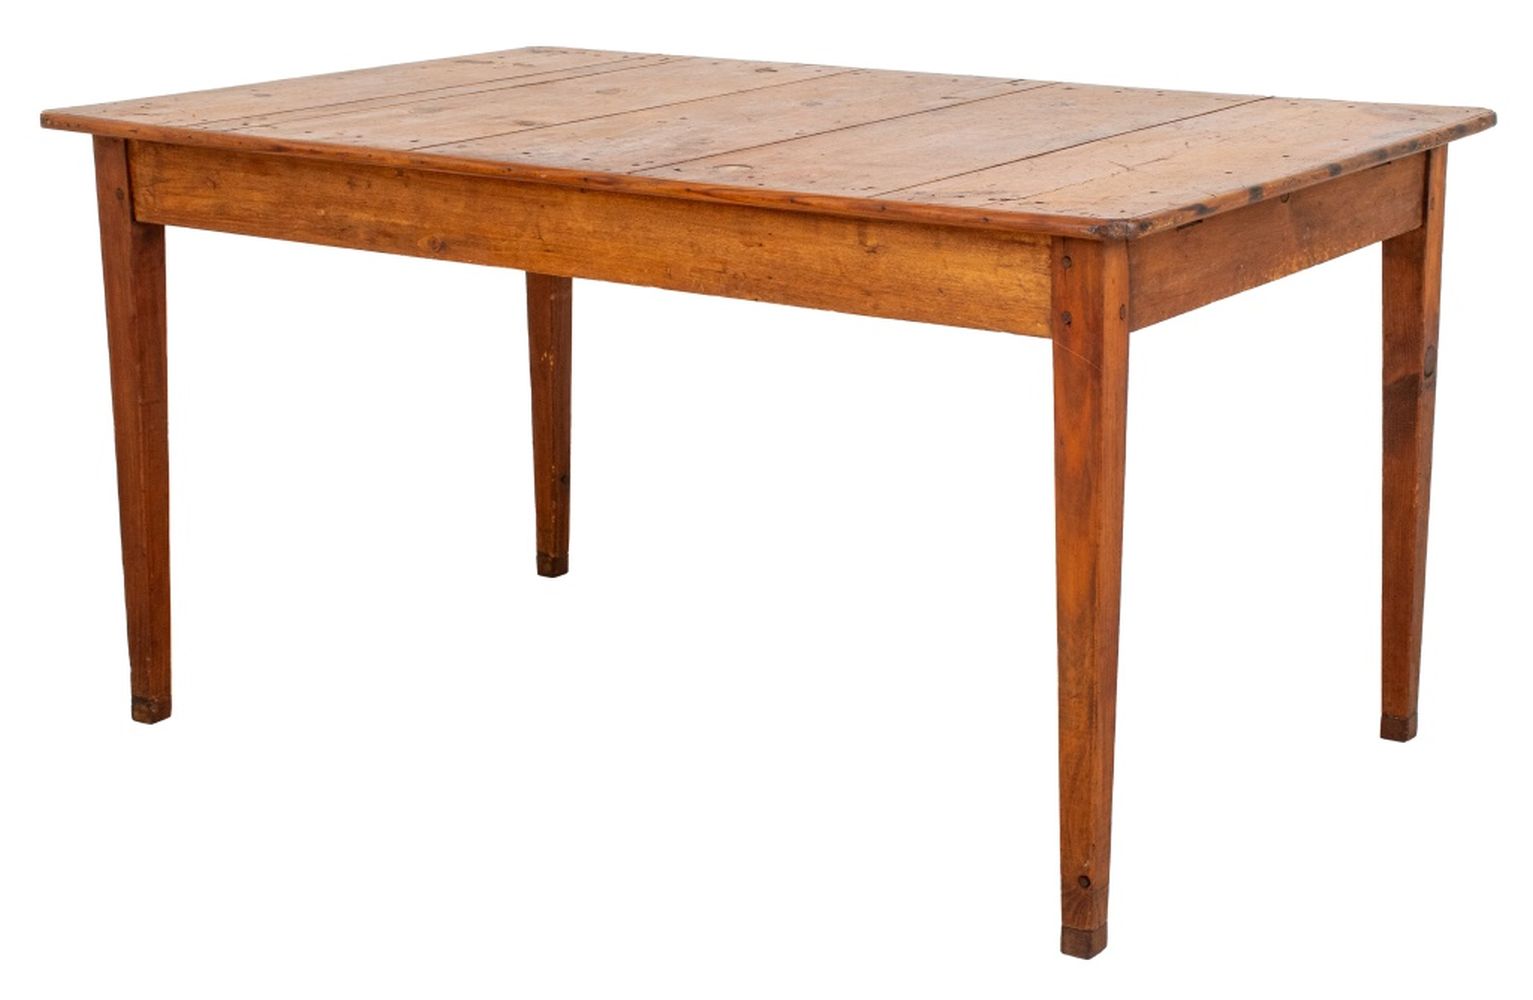 PROVINCIAL COUNTRY PINE TABLE,